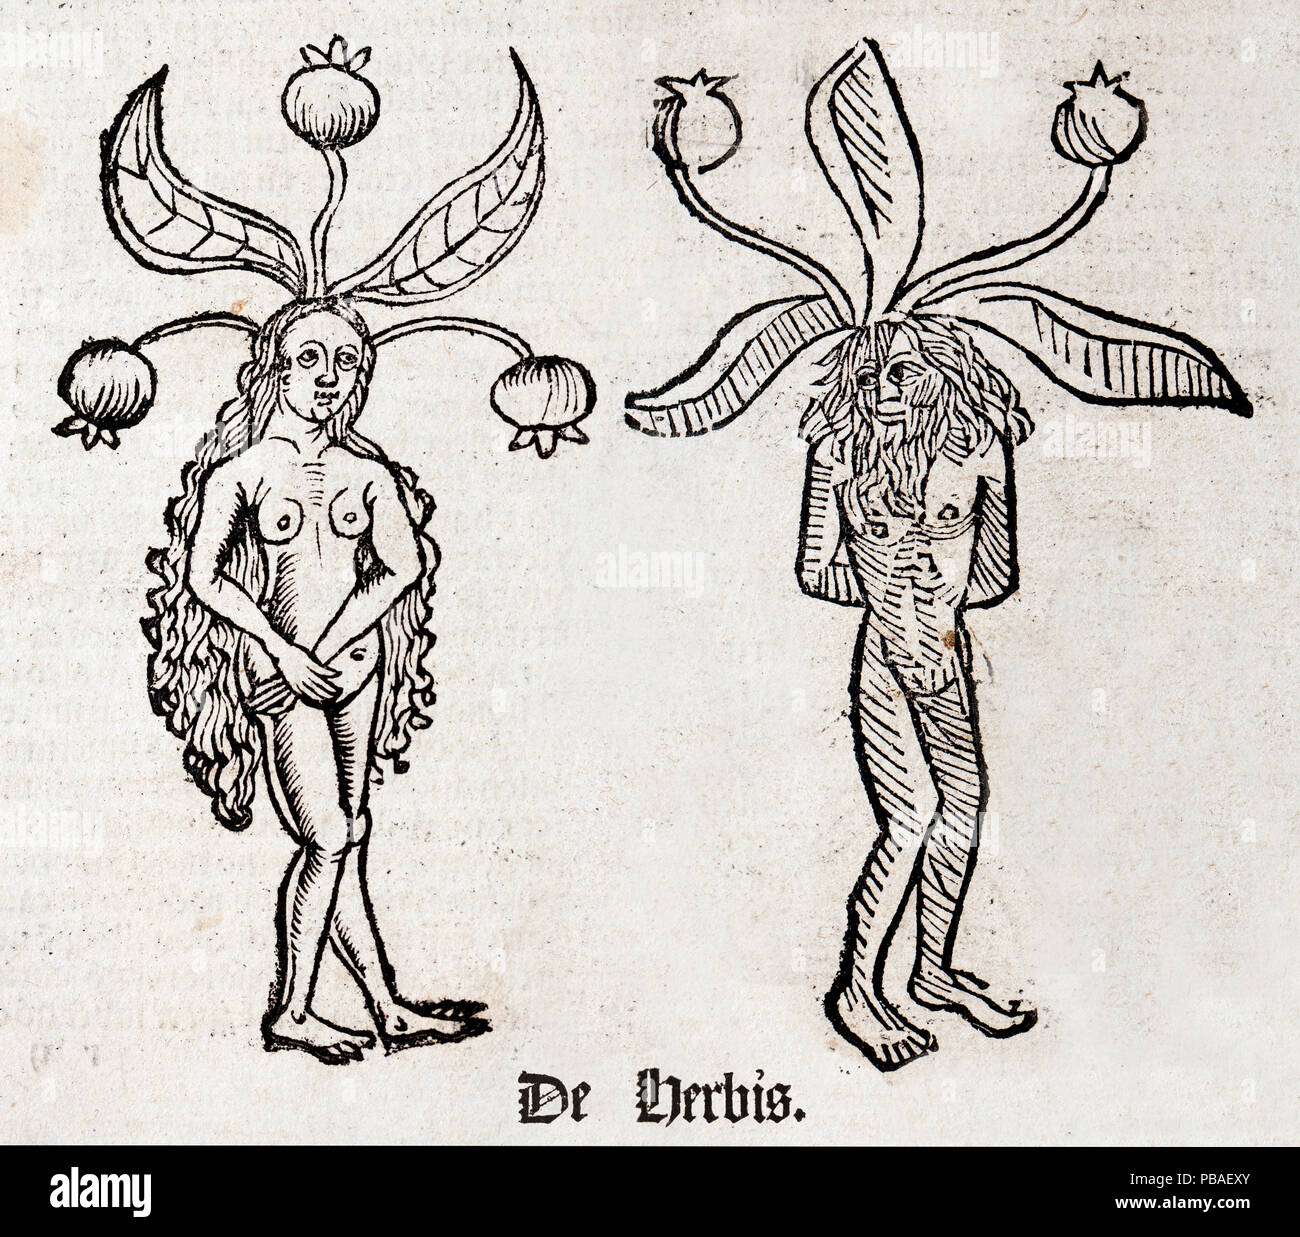 Woodblock illustration of Mandrake (Mandragora) from two pages of the Ortus (Hortus) sanitatis - translated from the Latin as 'Garden of Health' by Jacob Meydenbach, 1491. He describes plants and animals (both real and mythical) together with minerals and medicine.  The mandrake has a wrinkled forked root which is supposed to looks like a human body. Stock Photo